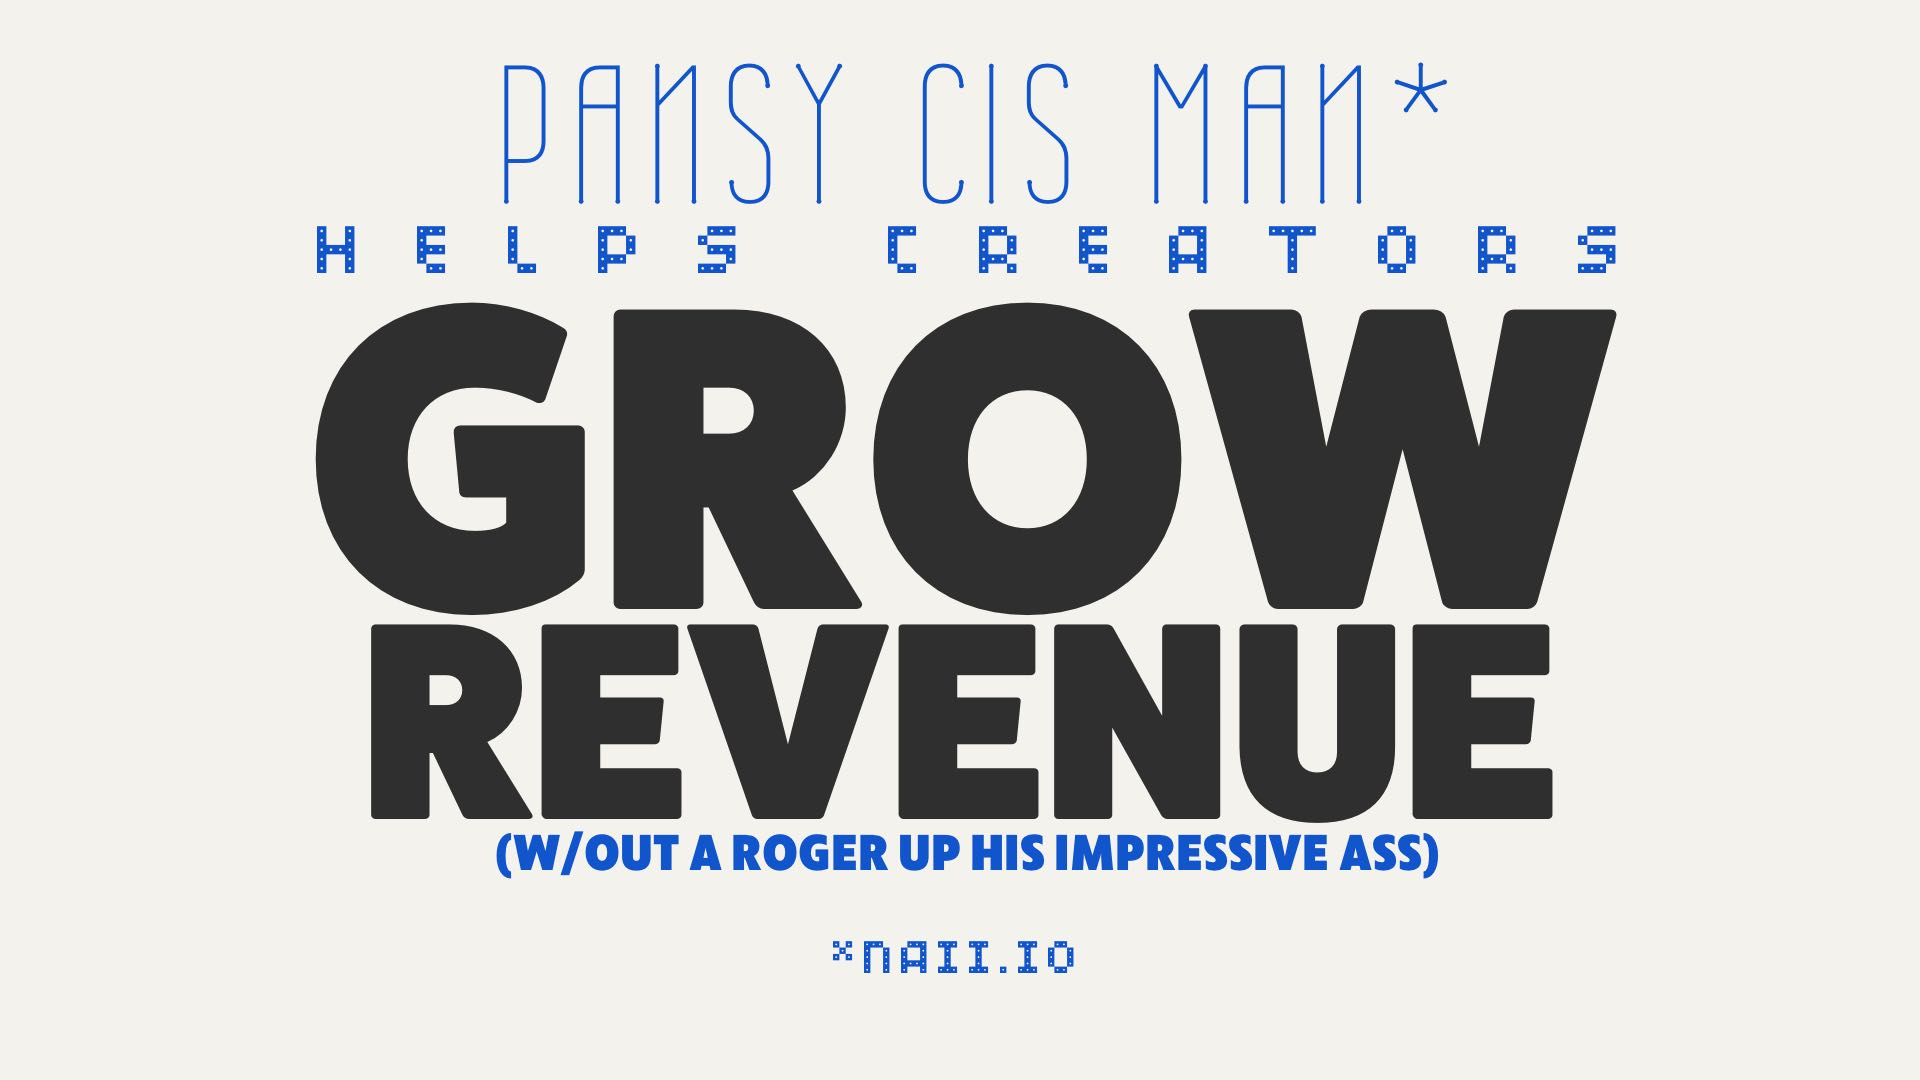 Pansy cis man helps creators grow their revenue without a sticky Roger up his impressive ass (not taking himself too seriously)